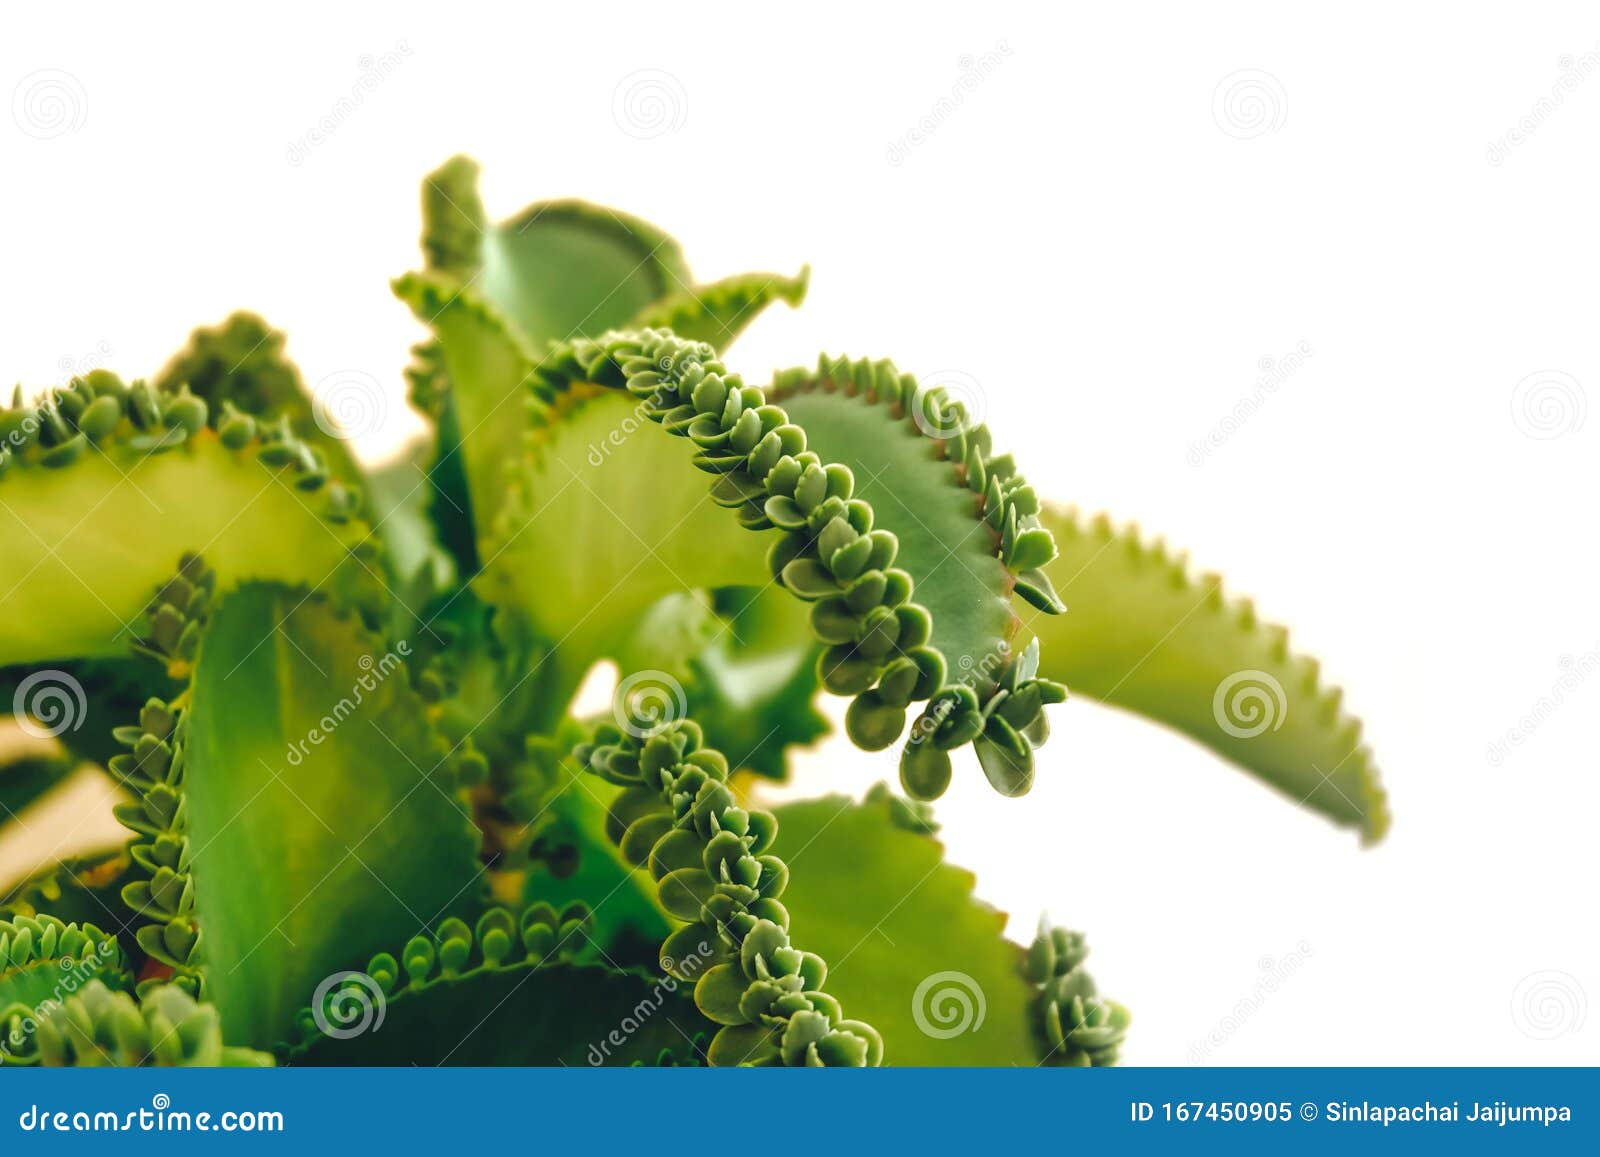 mother of thousands, mexican hat plant kalanchoe pinnata with sprout.  on white background